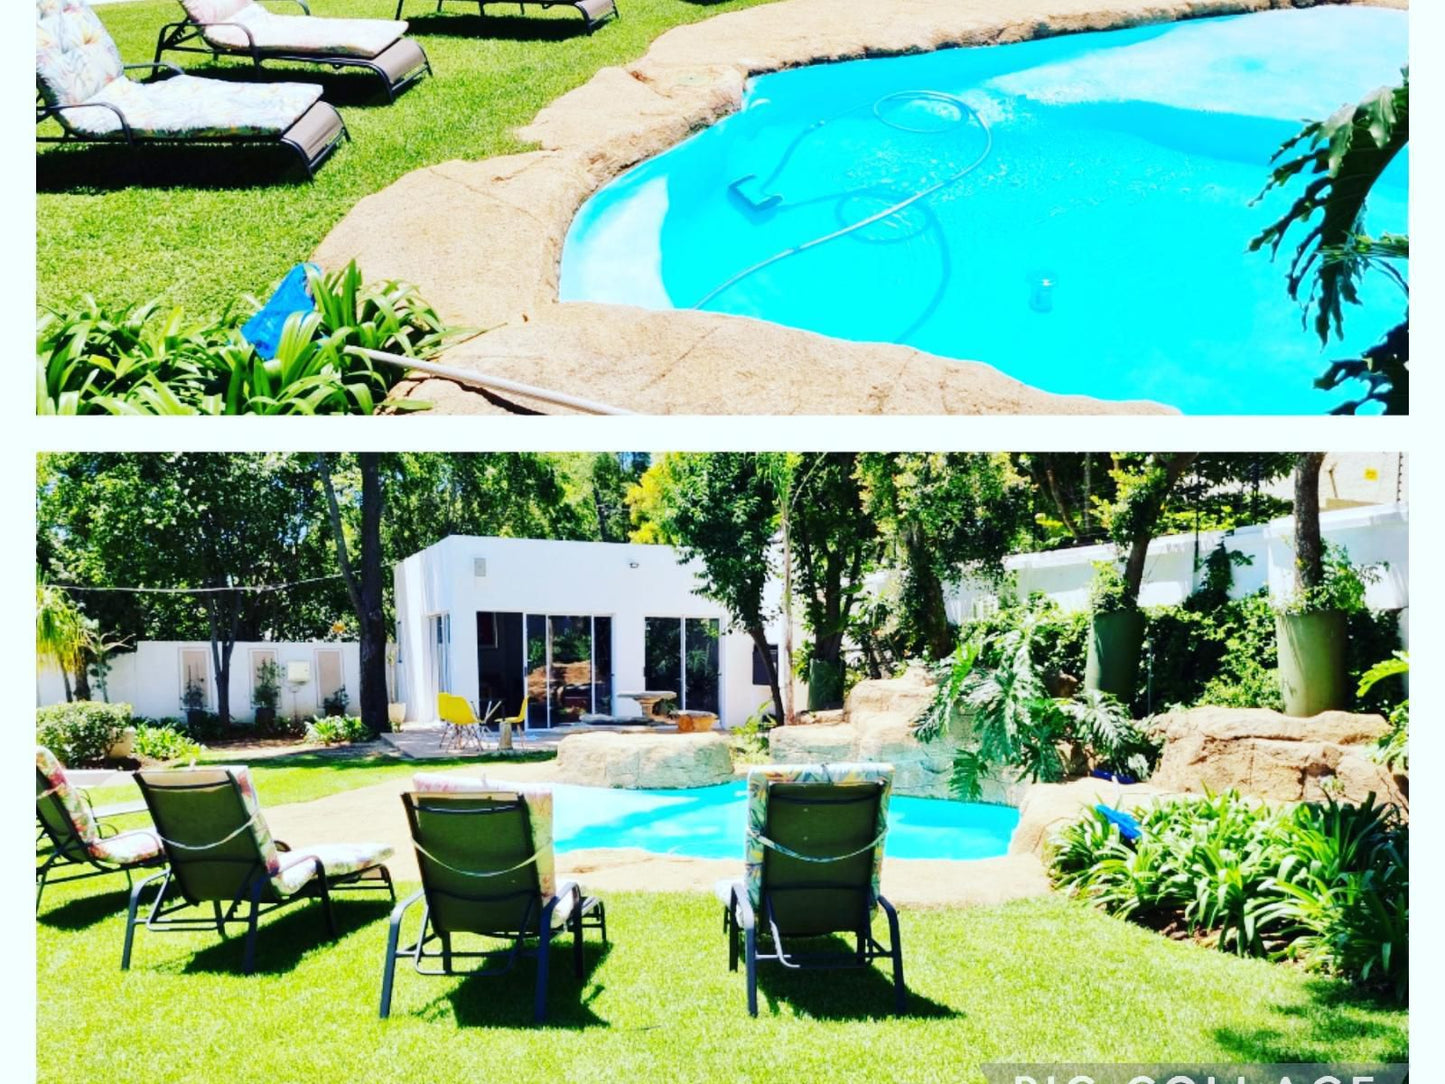 Richtershuyz Lifestyle Guesthouse Brooklyn Pretoria Tshwane Gauteng South Africa Complementary Colors, Palm Tree, Plant, Nature, Wood, Garden, Swimming Pool